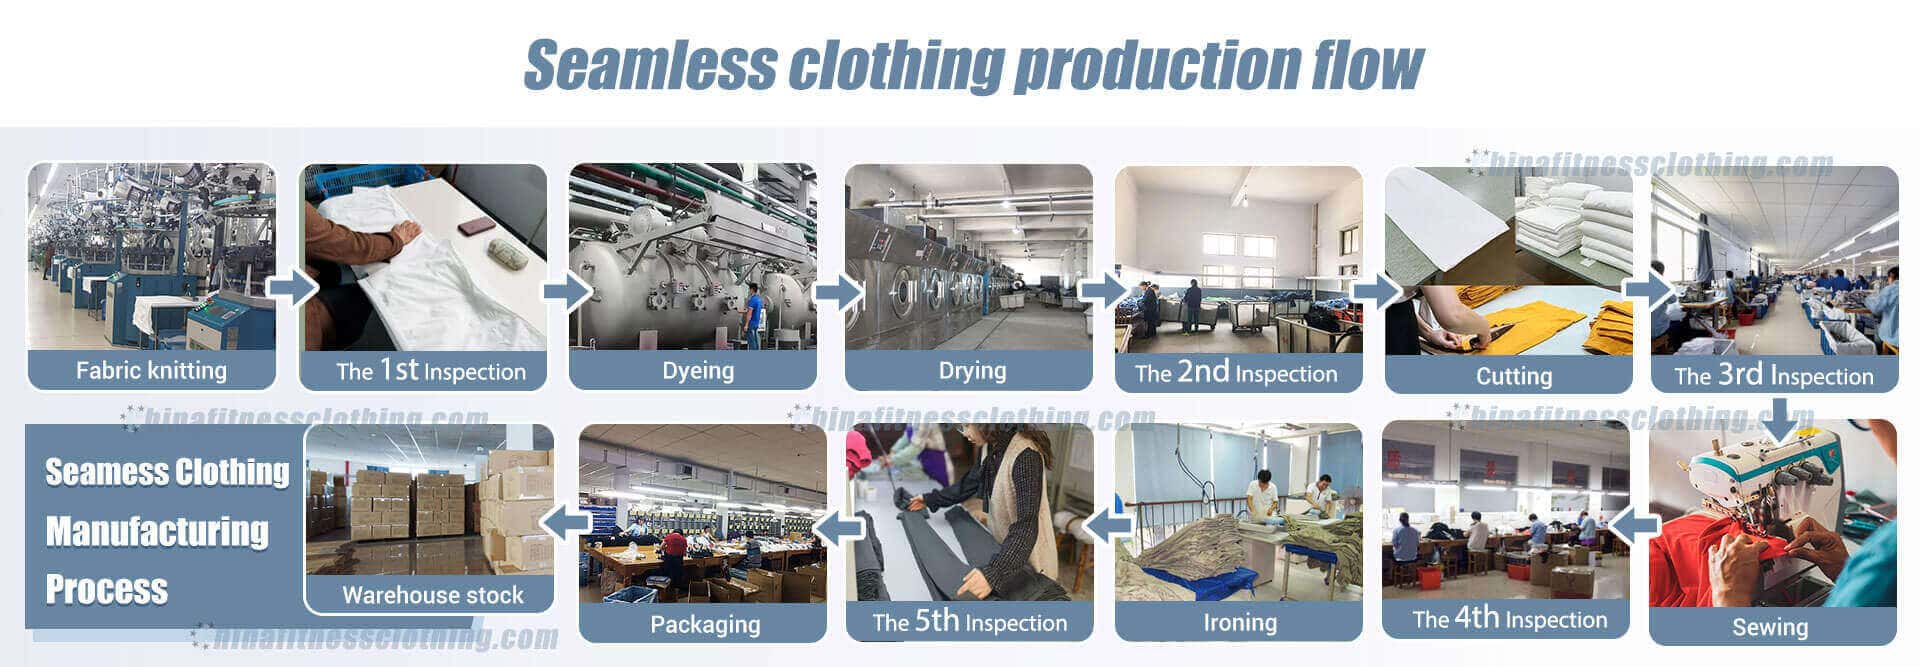 wholesale-seamless-clothing-manufacturer-production-flow